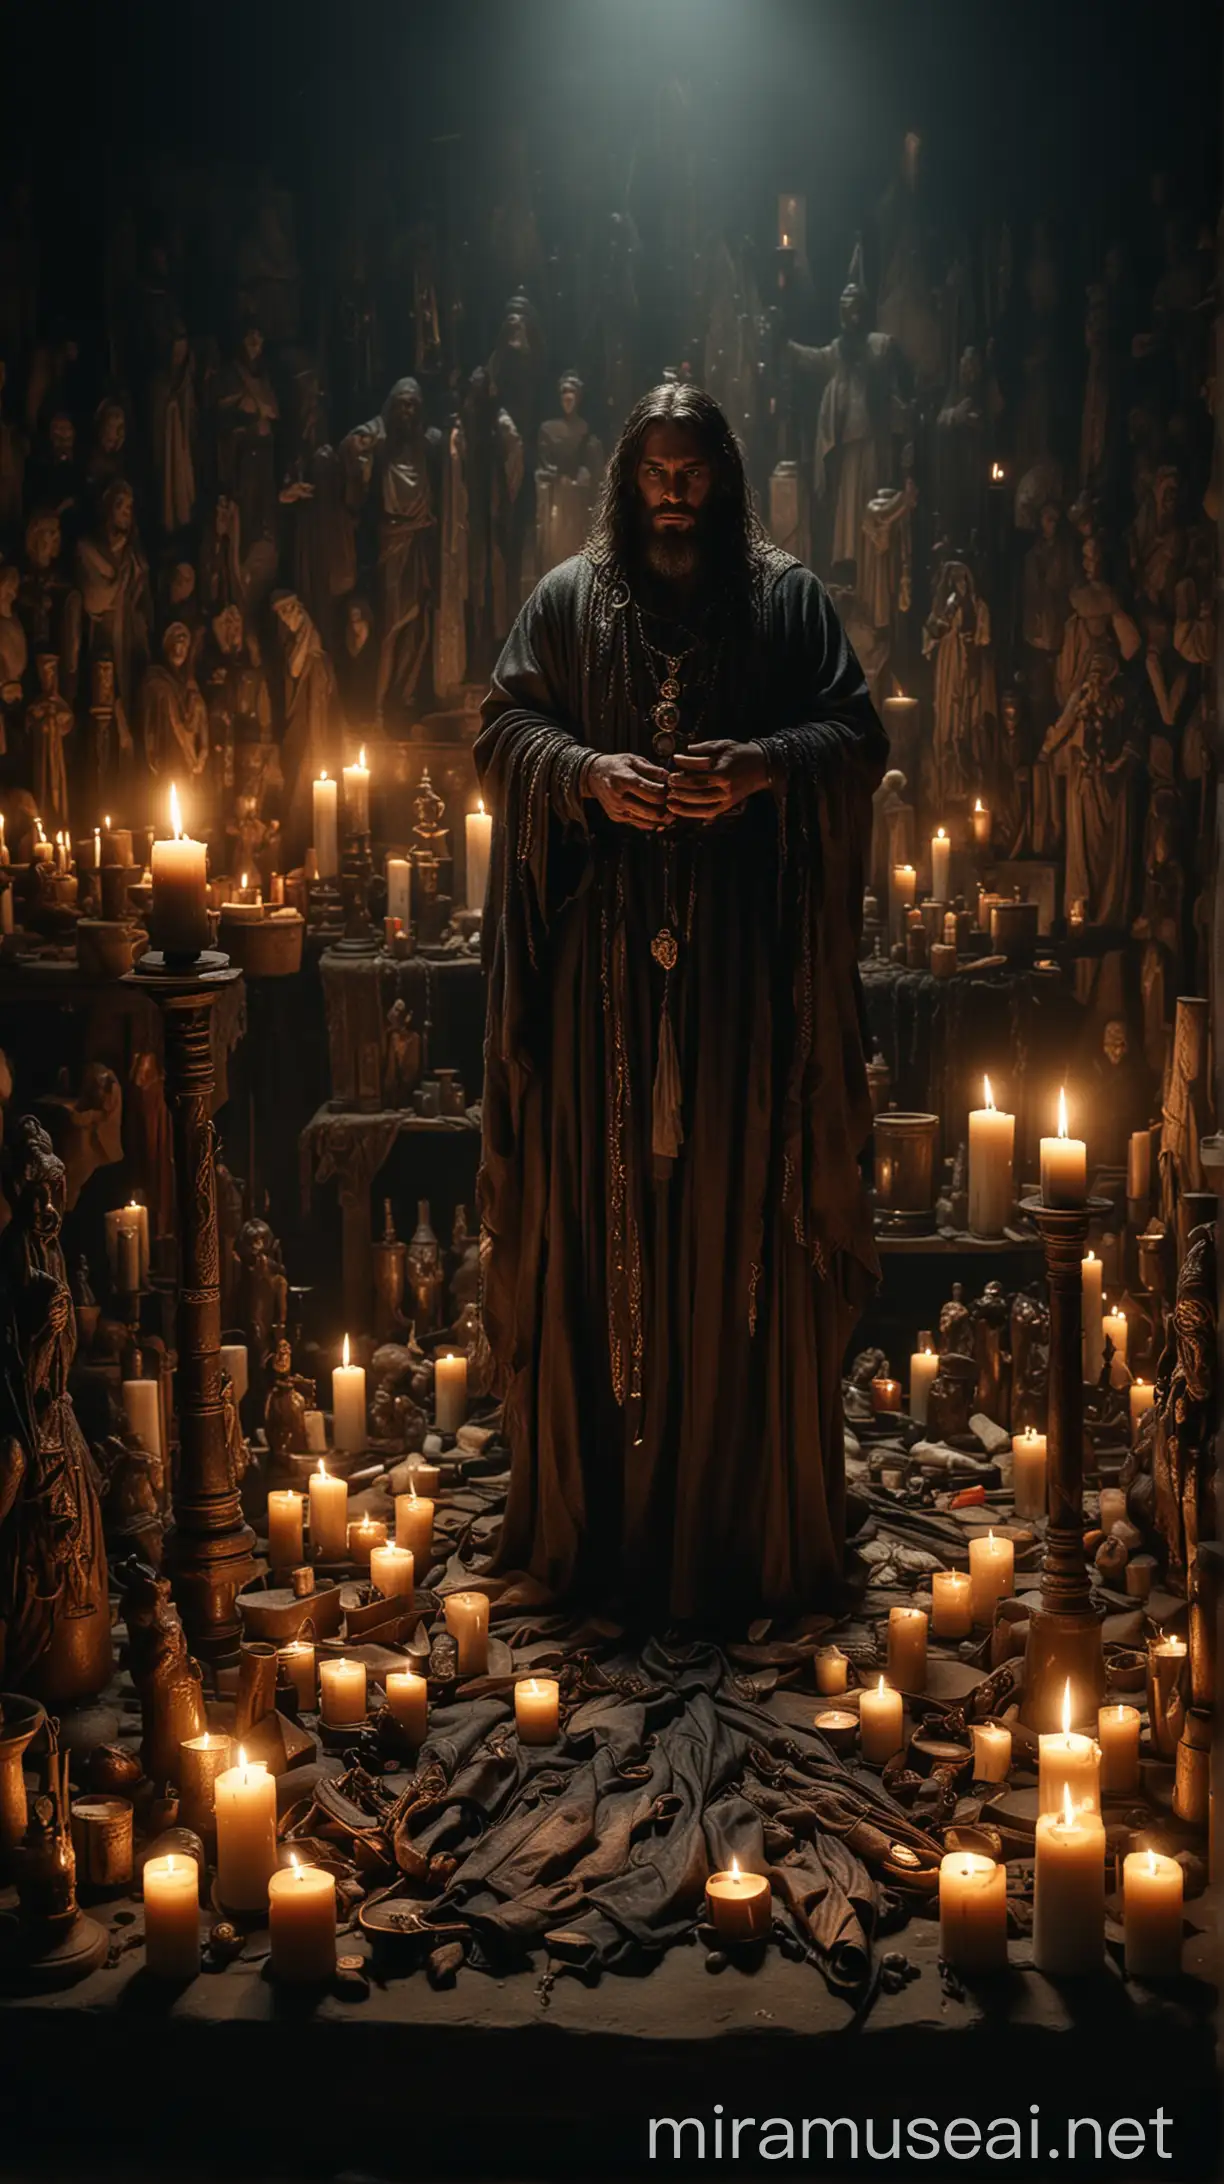 Dark Sorcerer in Candlelit Ritual with Mysterious Artifacts